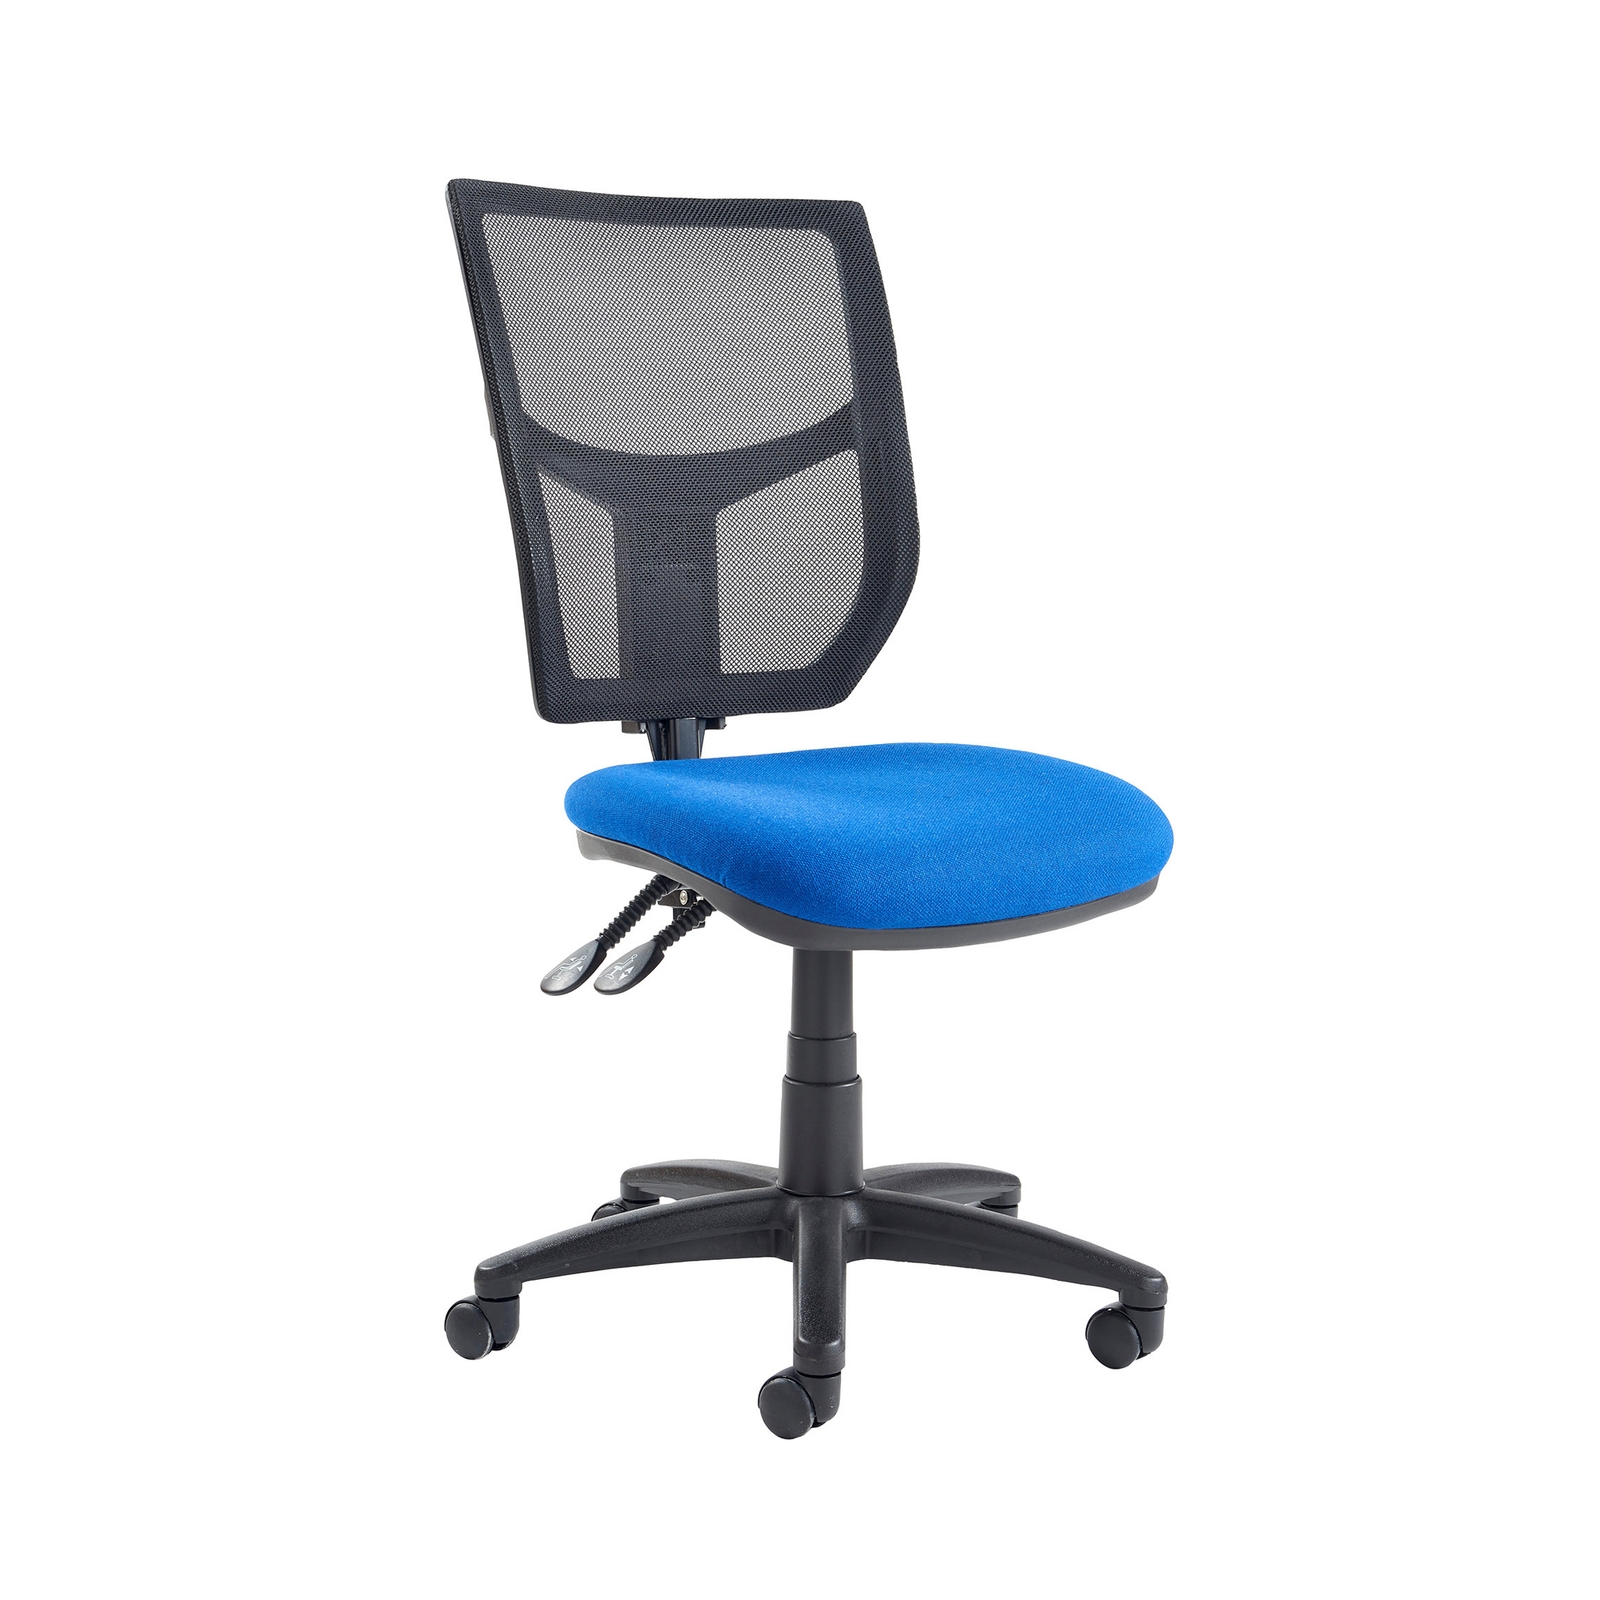 Altino High Back Operator's Chair - Blue